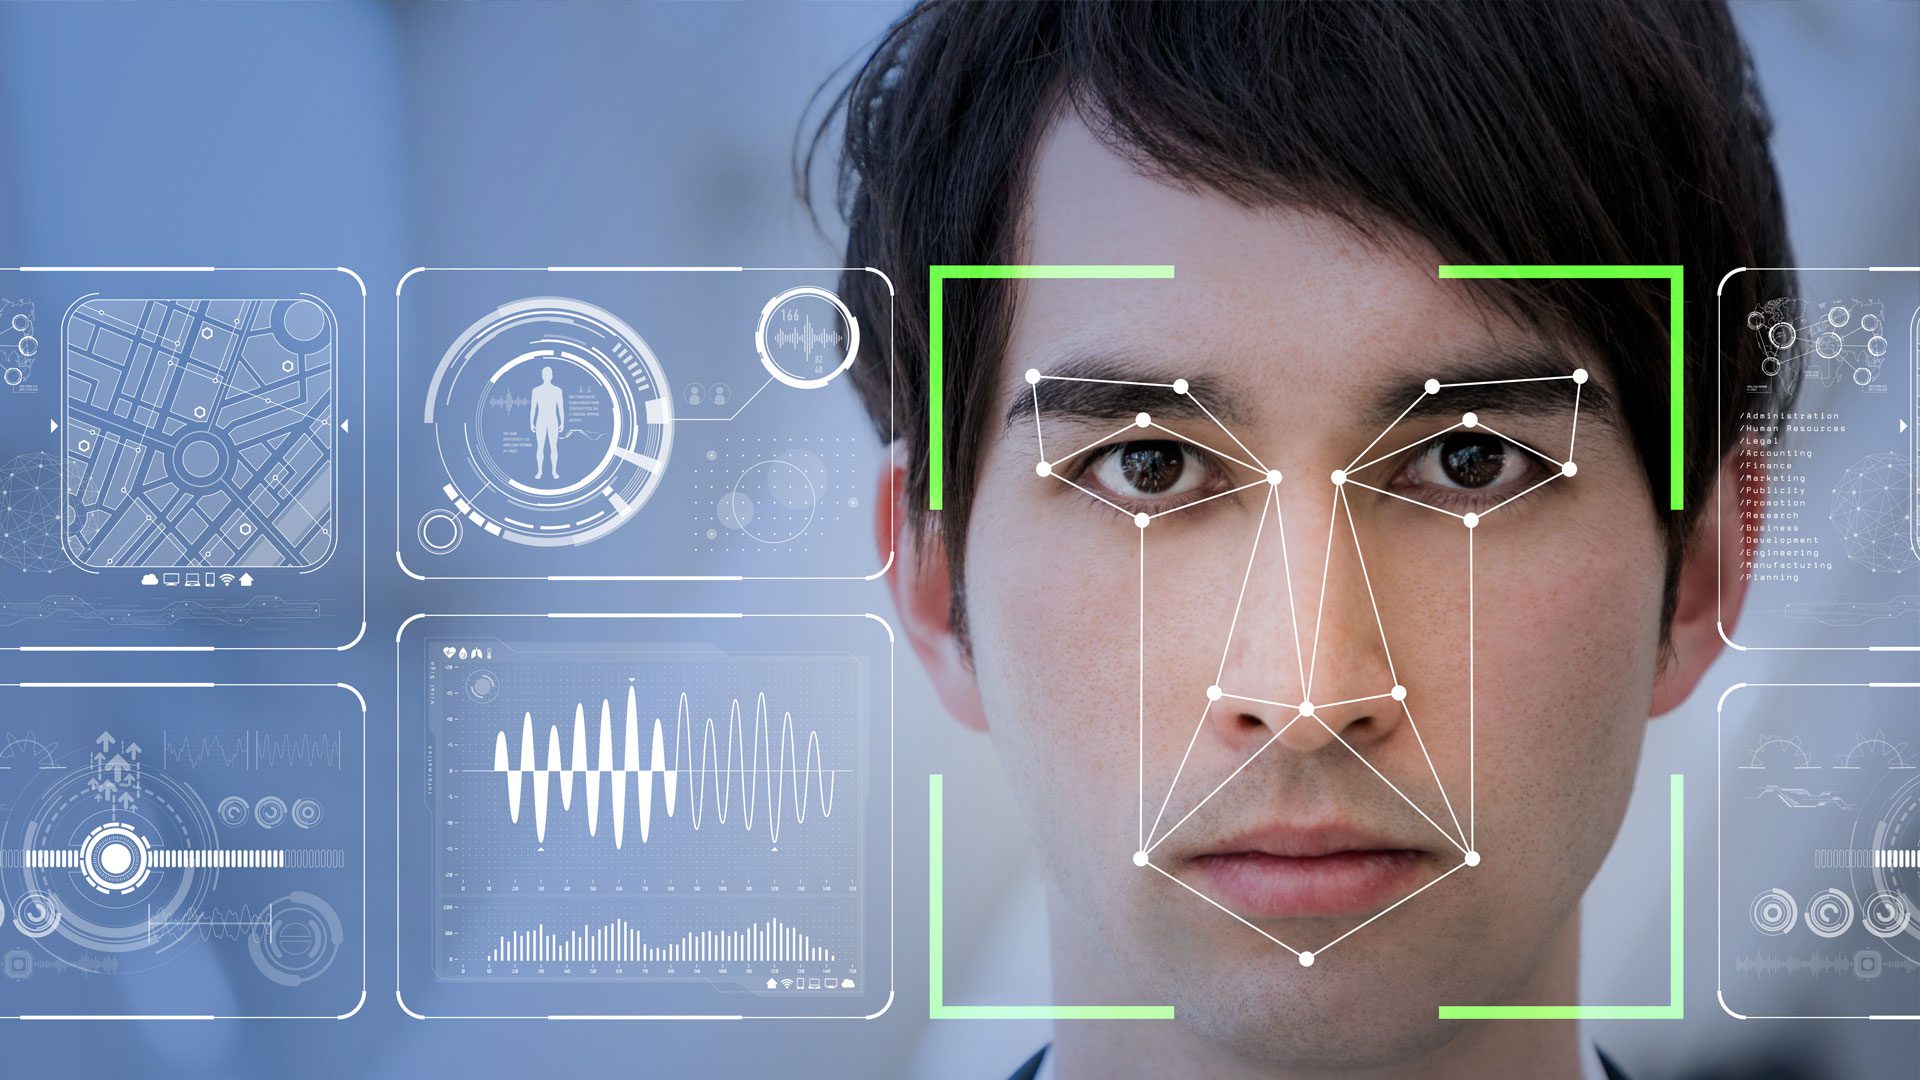 Facial Recognition technology on a young man's face